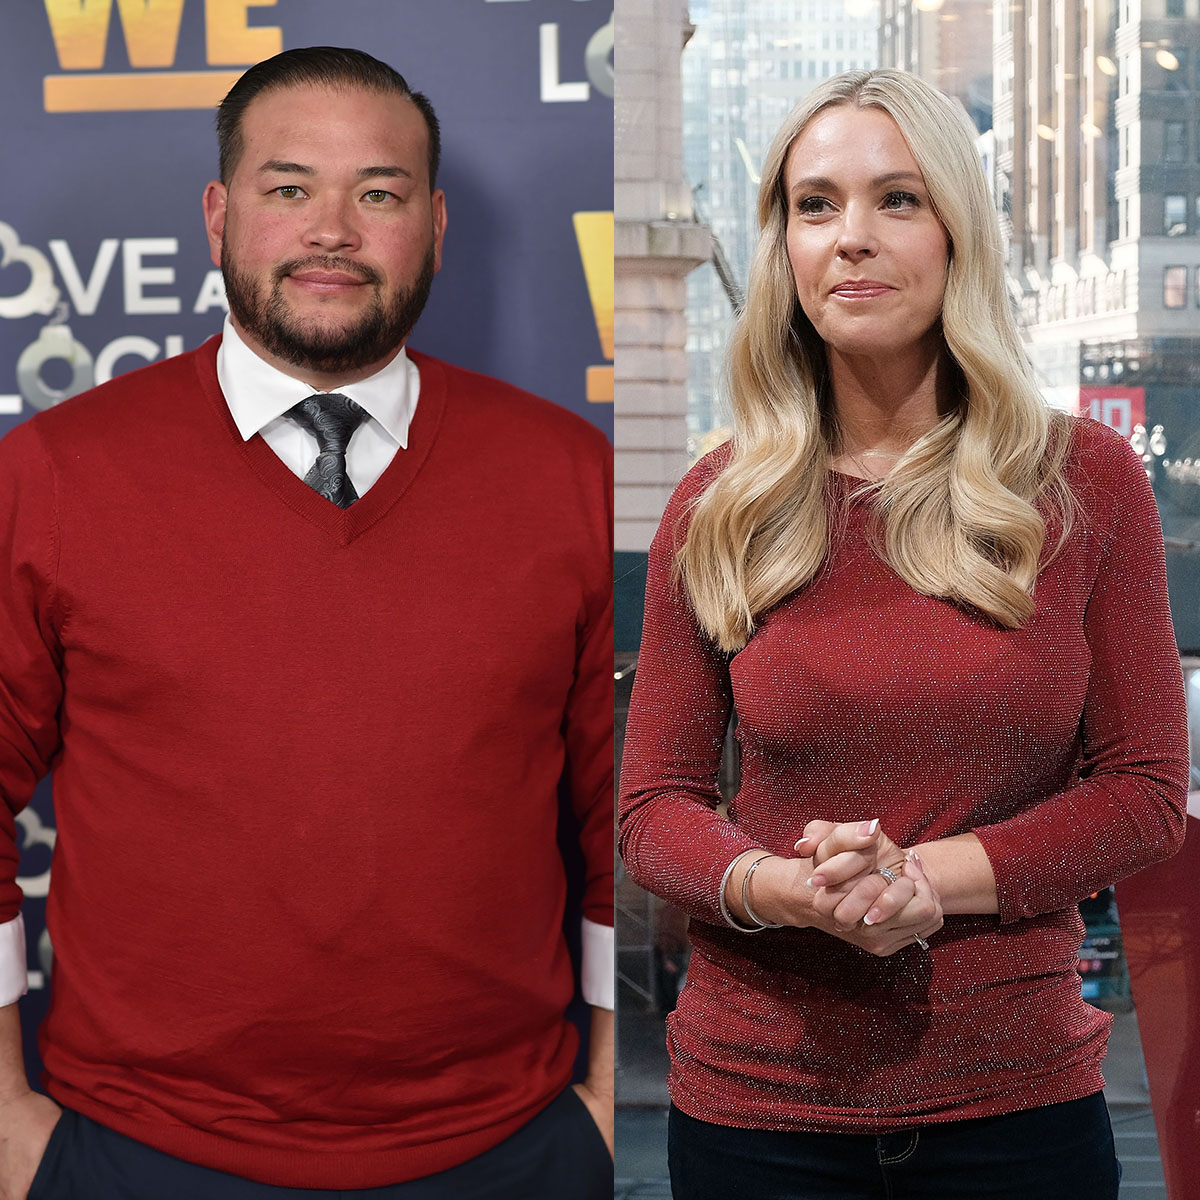 What Does Kate Gosselin Think of Jon Gosselin’s New Relationship? He Says…